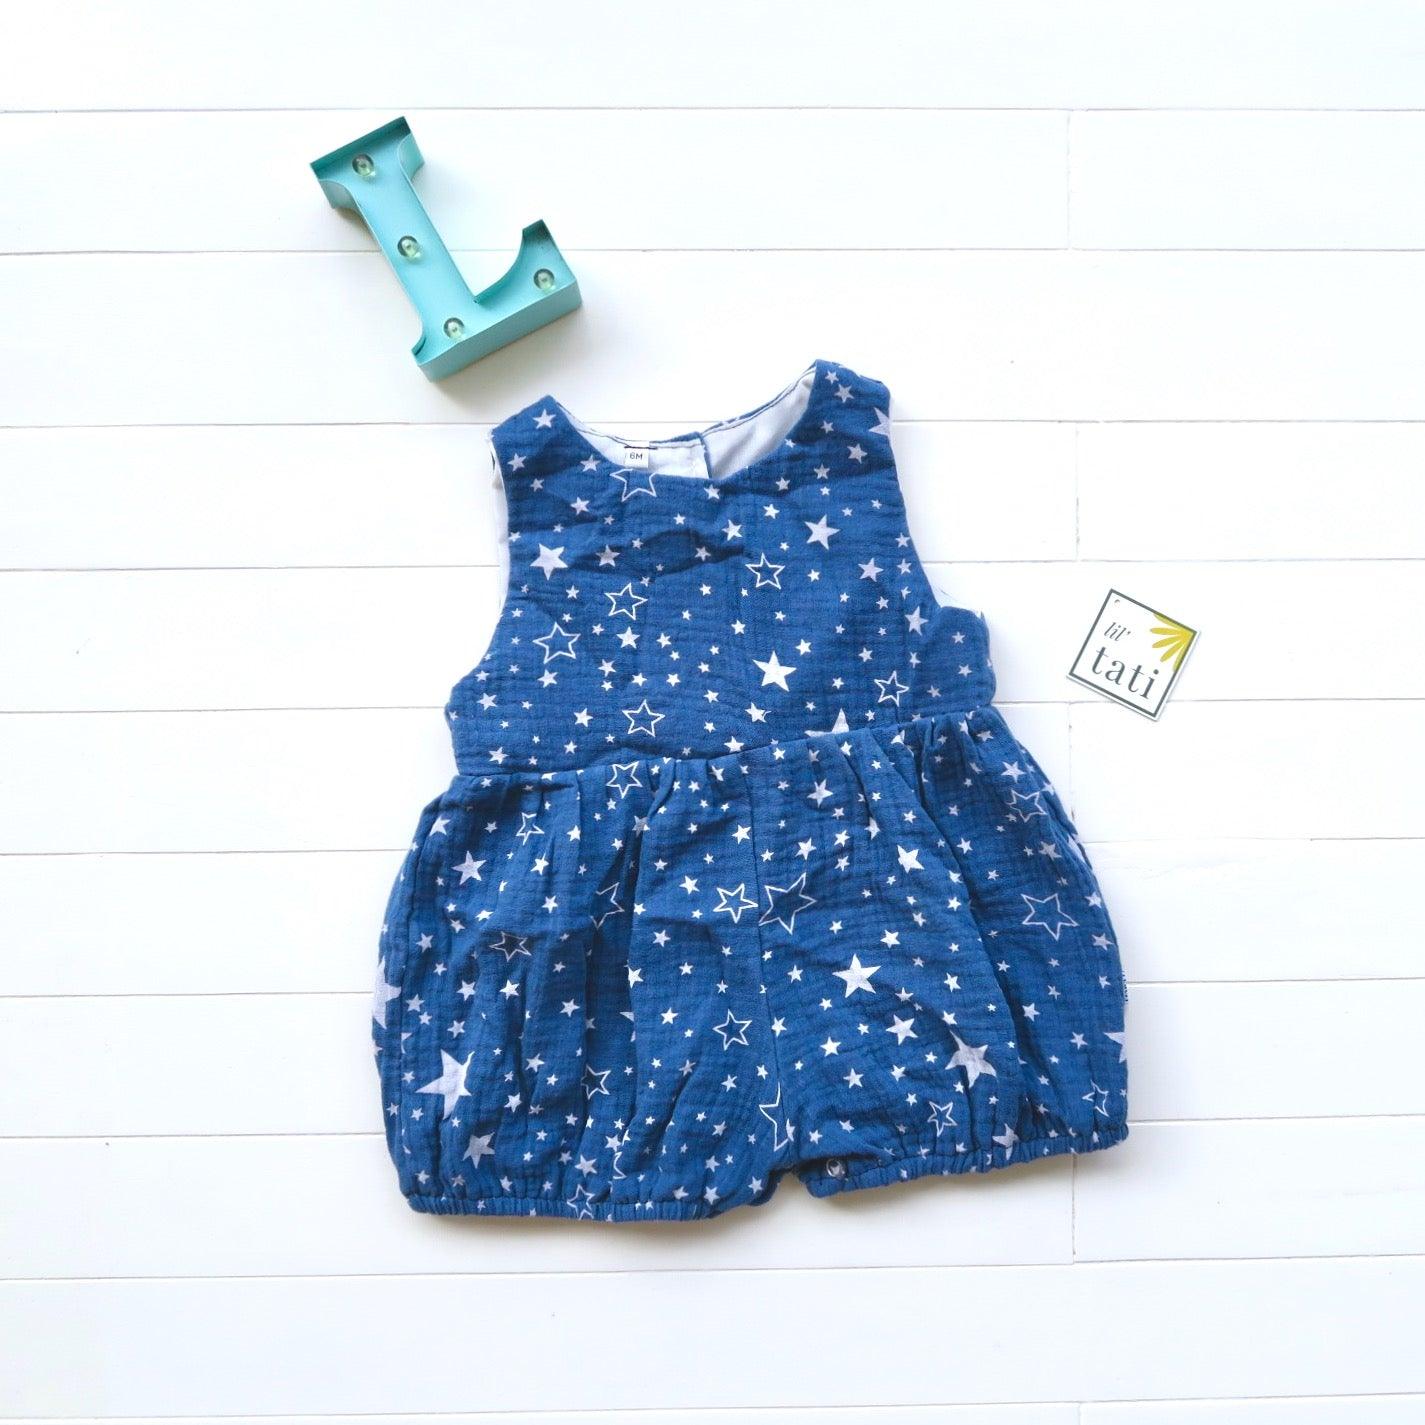 Orchid Playsuit in Navy Stars Crepe - Lil' Tati